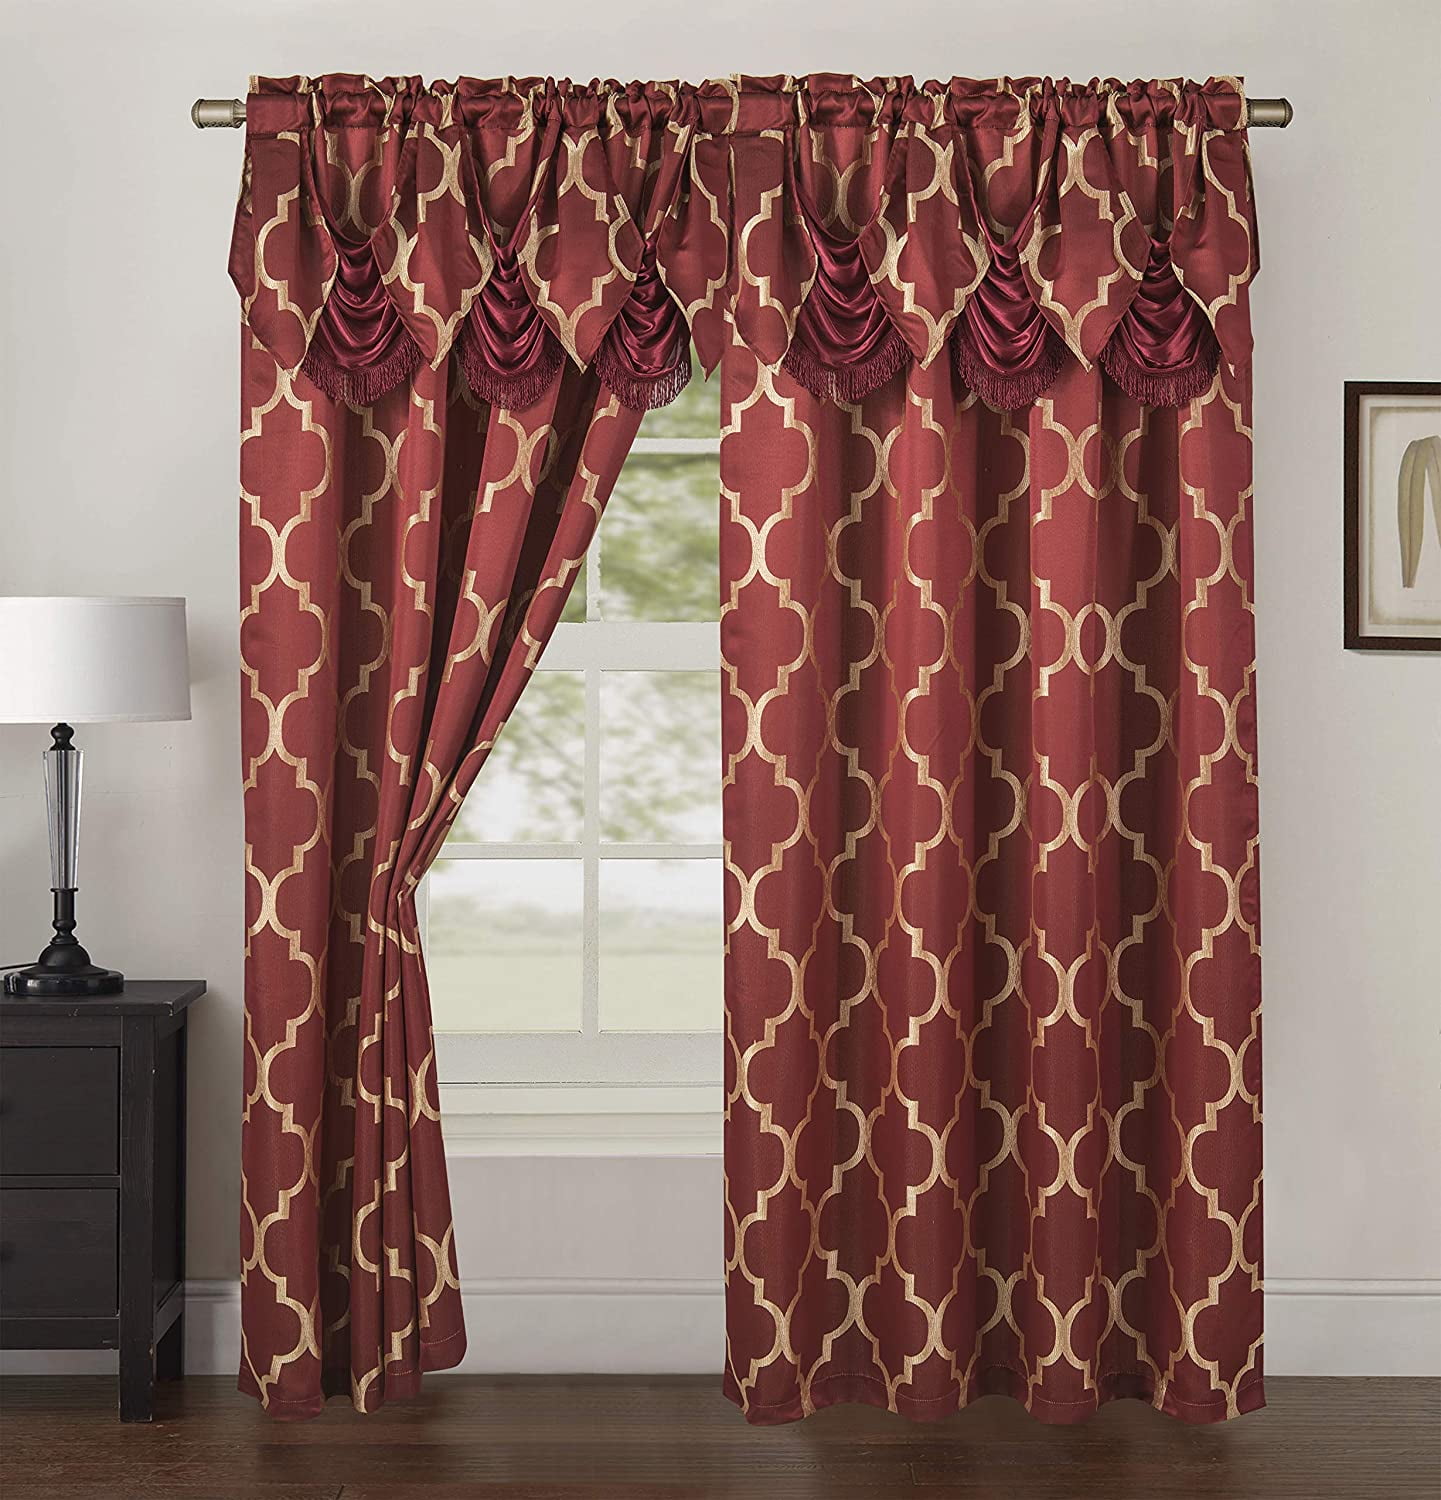 Details about   Stamping Star Window Curtains Bedroom Blackout Room Kitchen Voile Tulle Drapes 